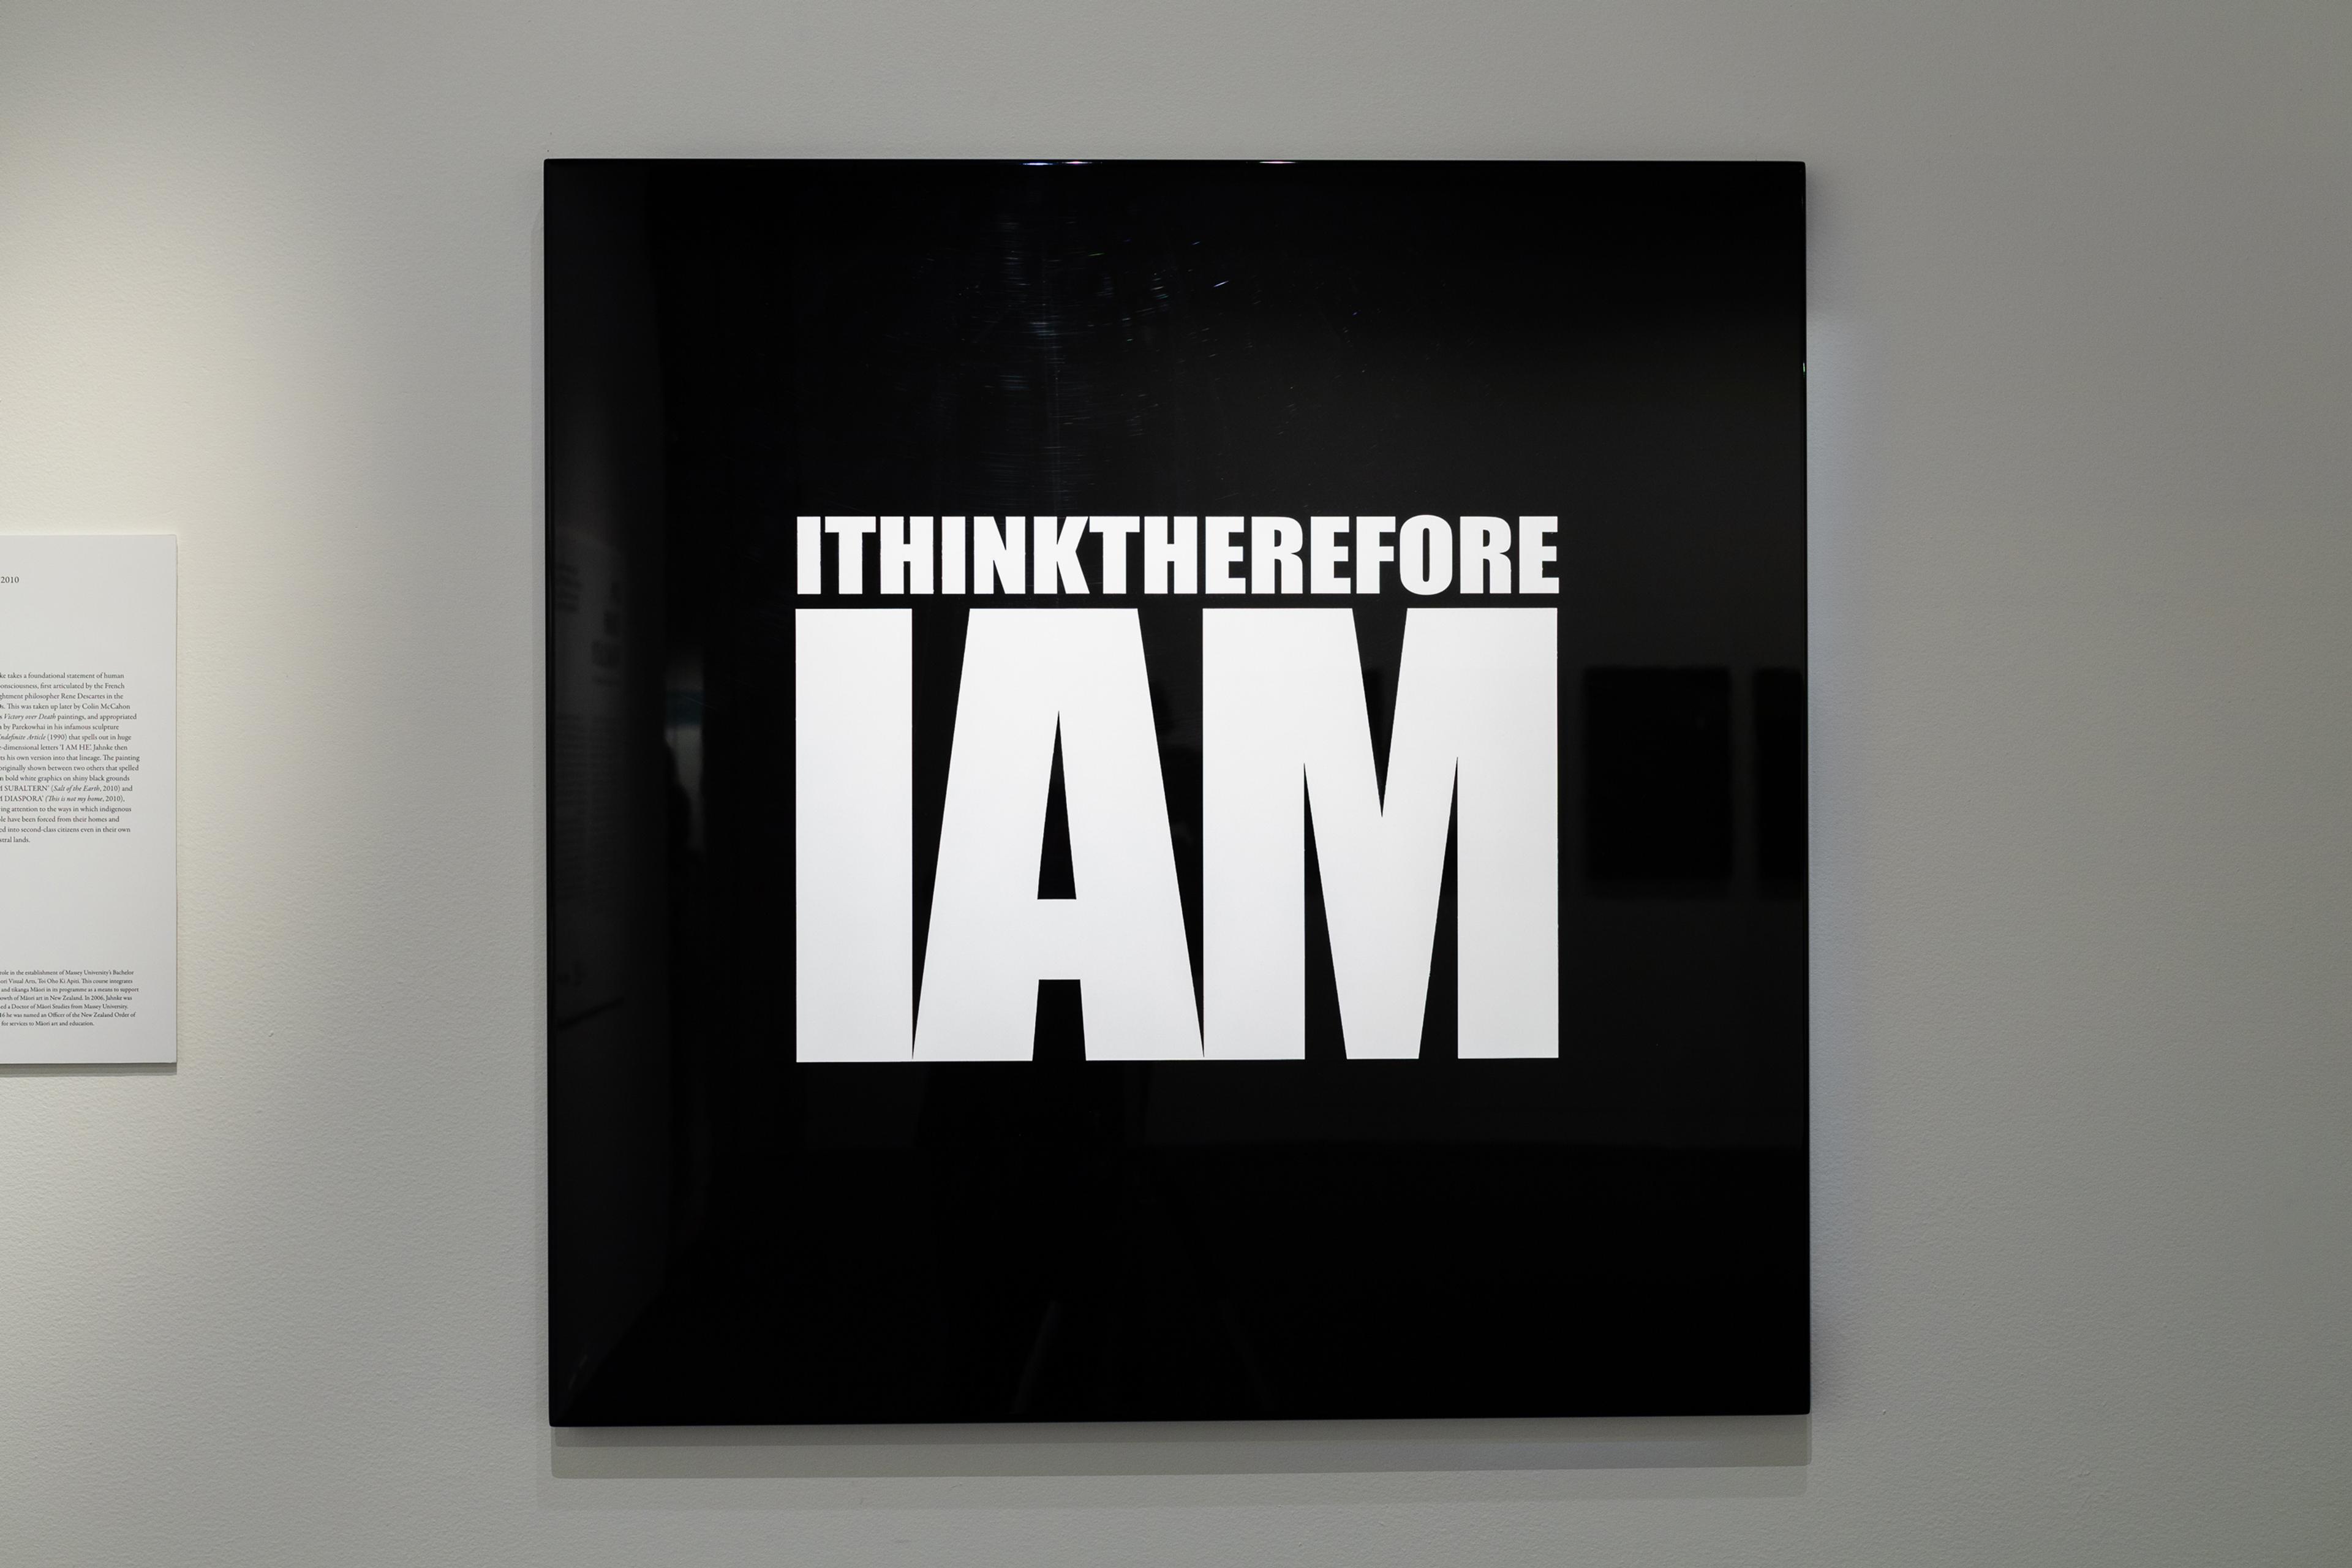 Robert Jahnke, Cogito Ergo Sum (ITHINKTHEREFORE IAM), 2010, lacquer on stainless steel, artwork 